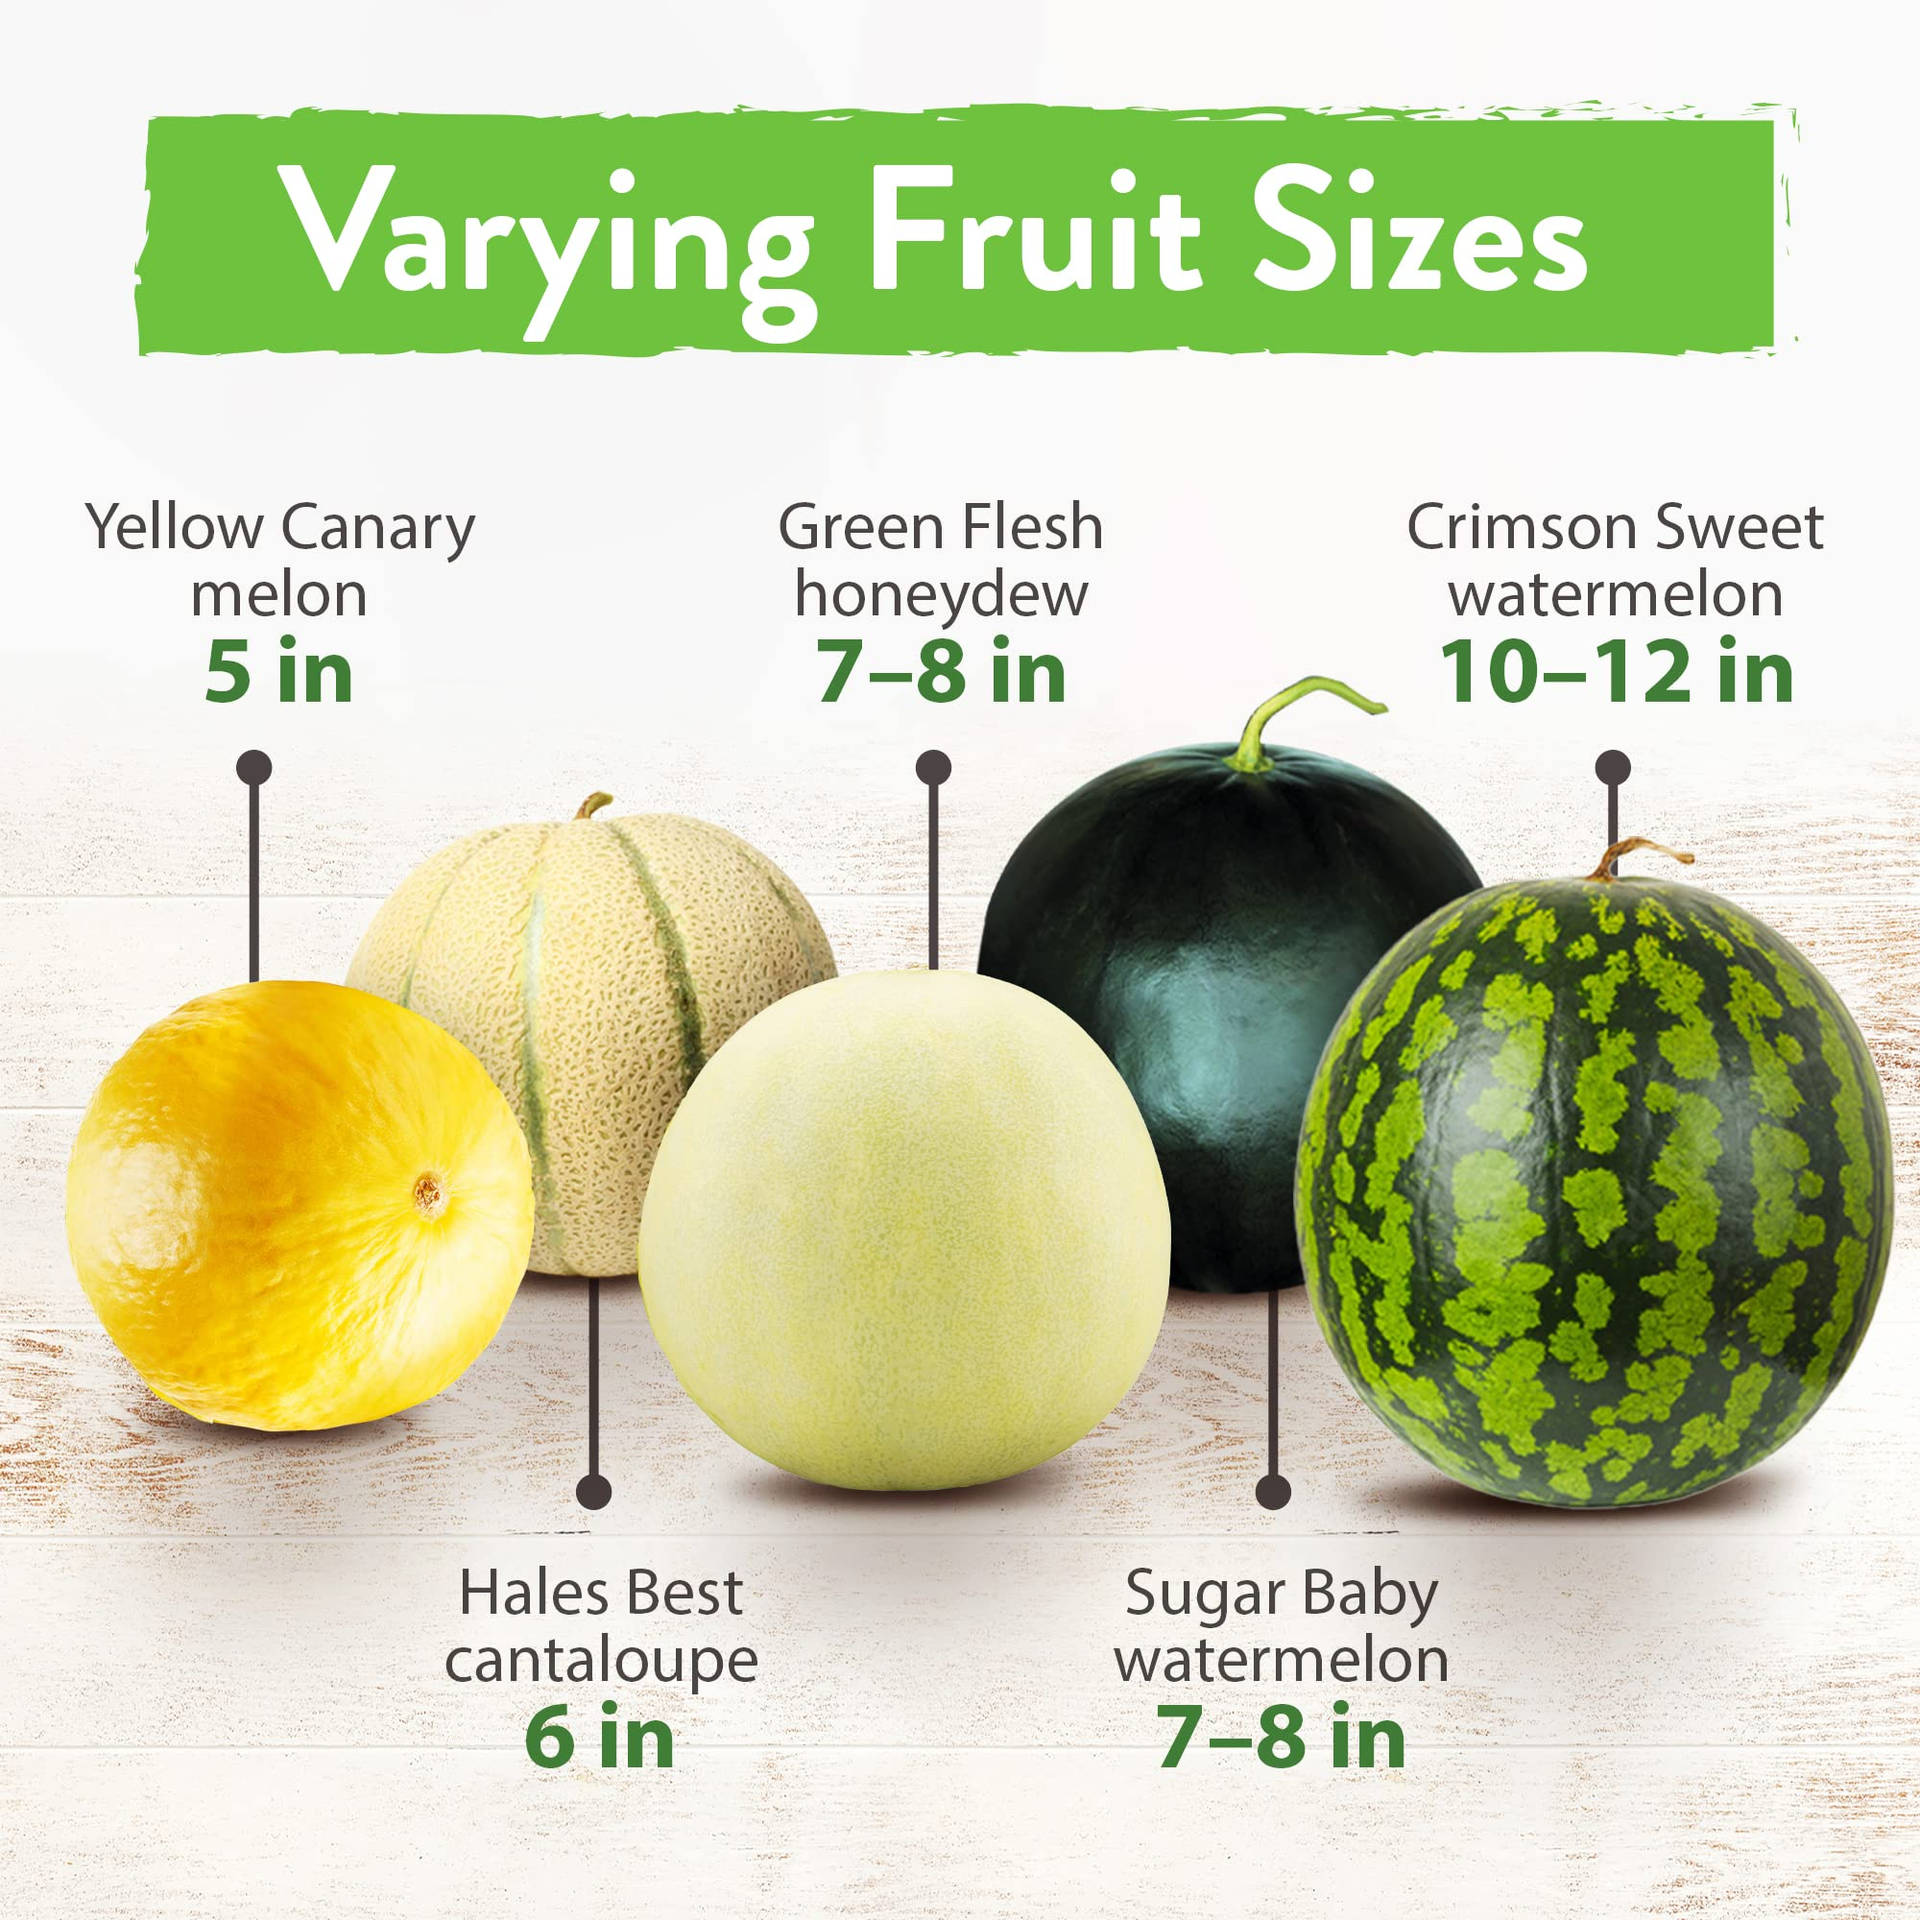 Canary Melon In Fruit Sizes Wallpaper